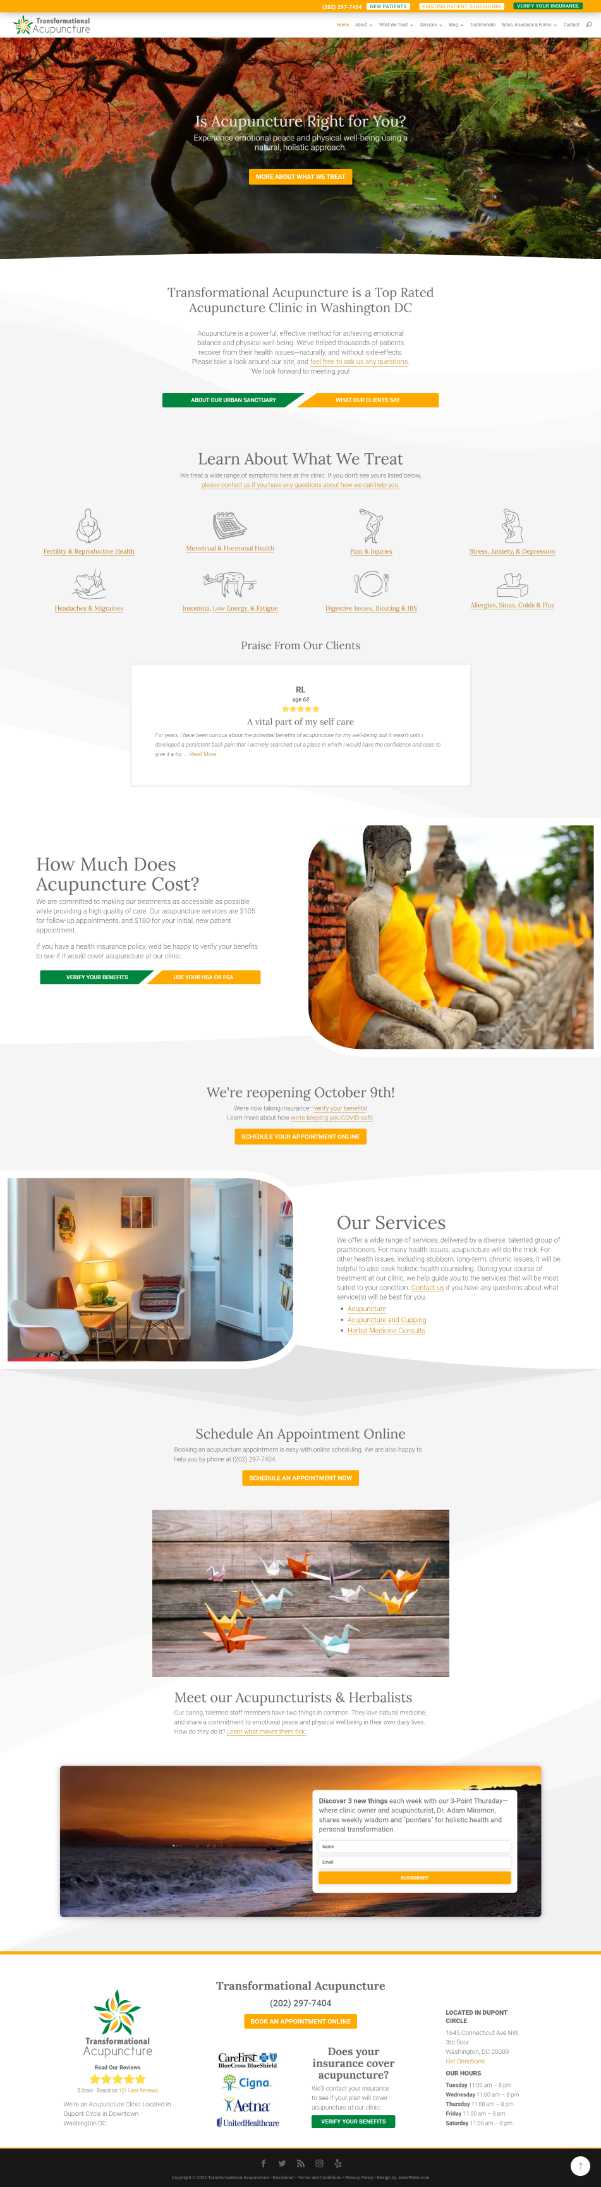 Screenshot of Transformational Acupuncture's home page